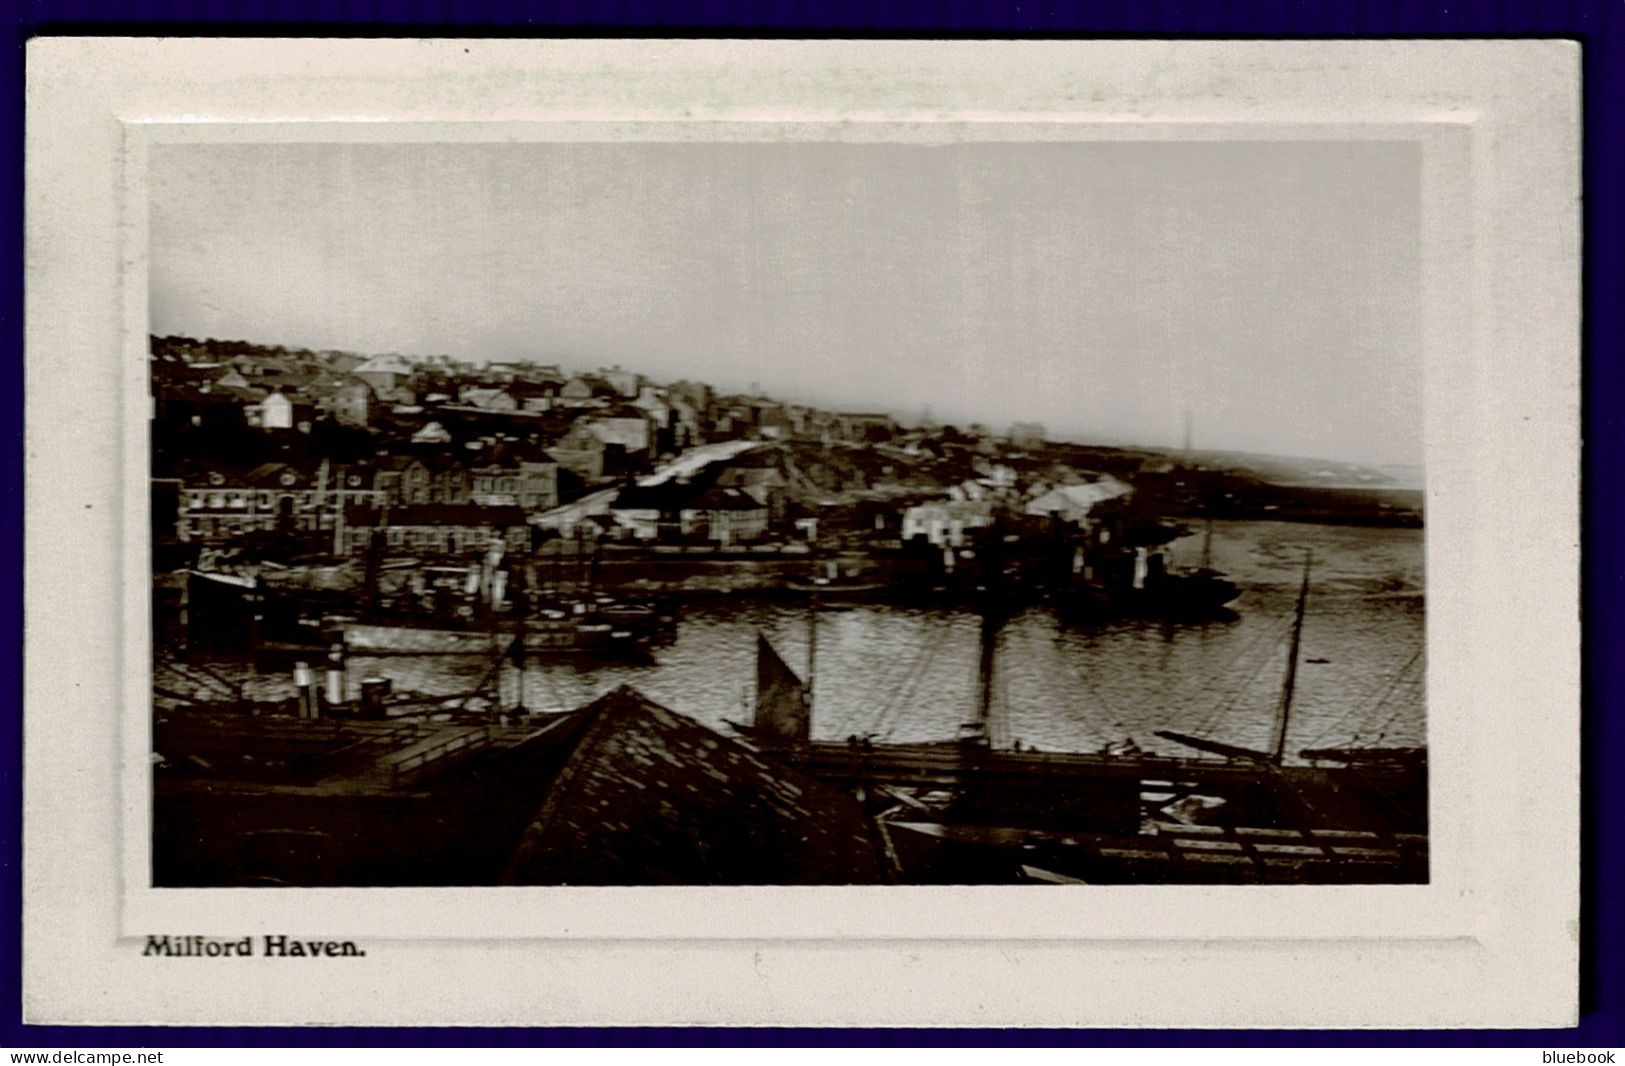 Ref 1633 - Early Real Photo Postcard - Port & Ships Milford Haven - Pembrokeshire Wales - Pembrokeshire